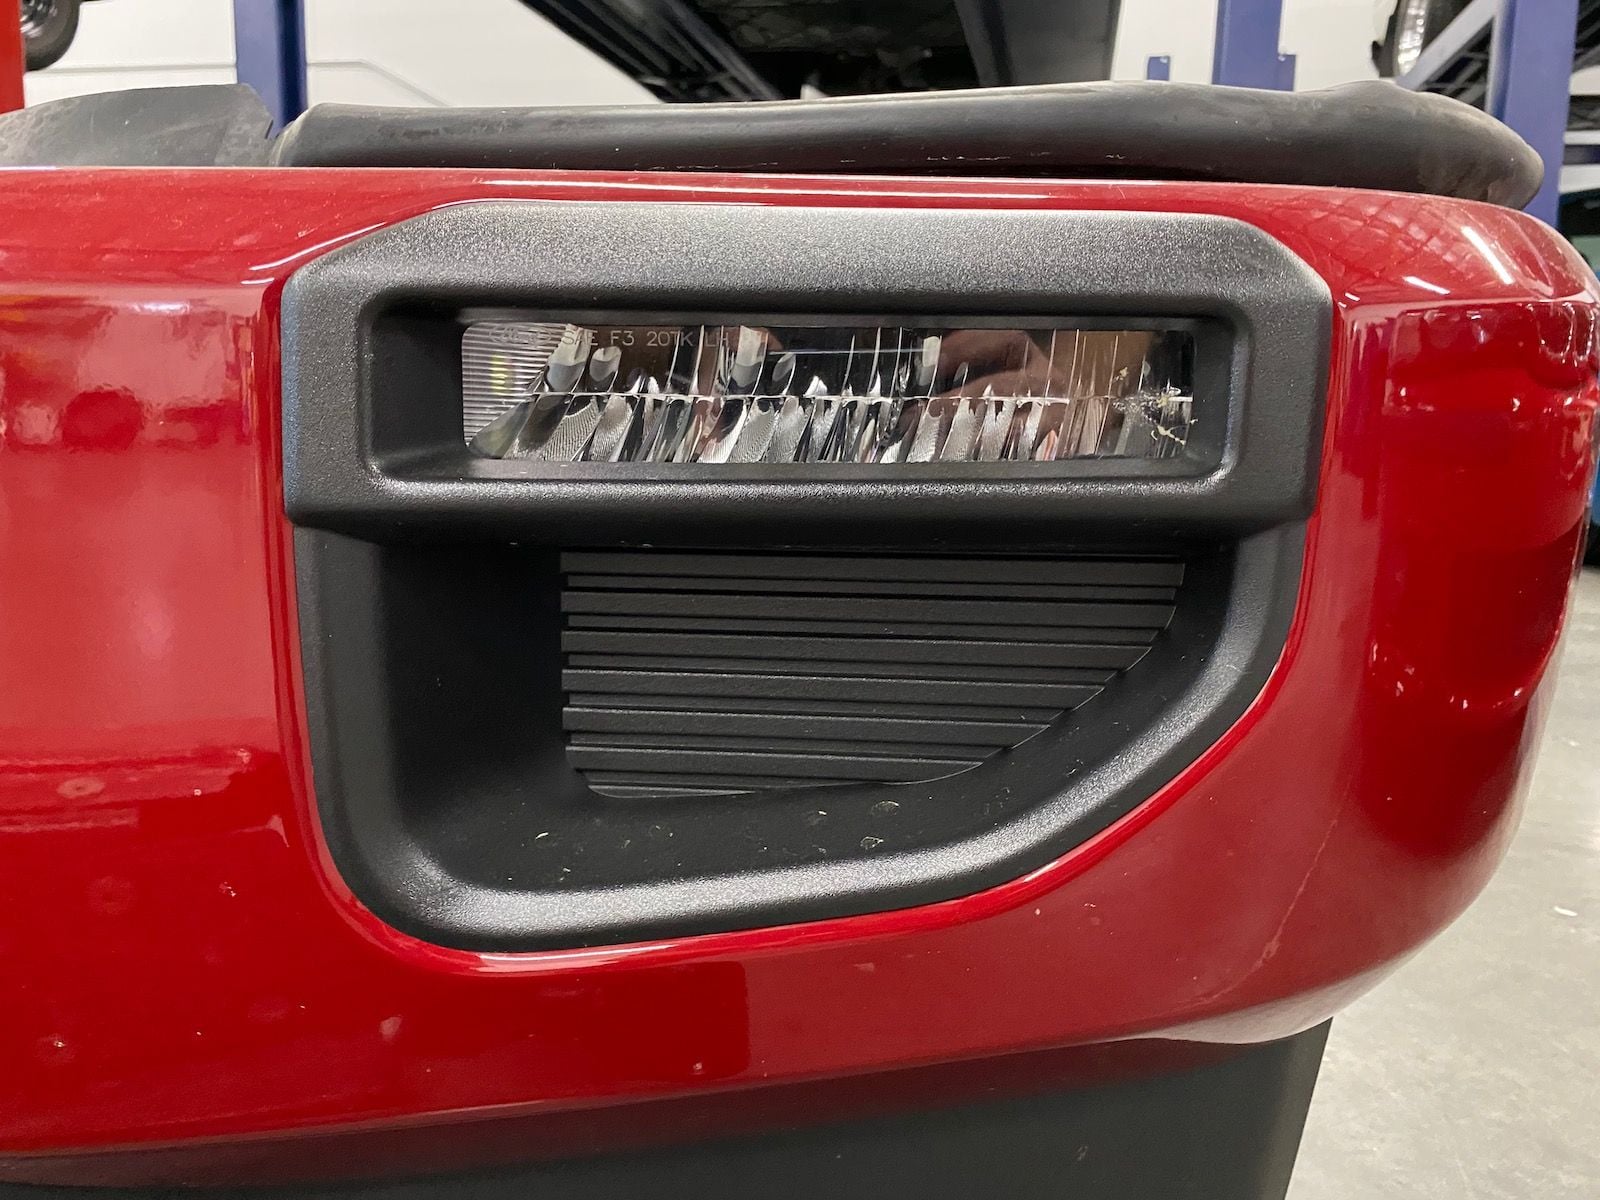 2020 Ford F-250 Super Duty - Front Bumper - Factory Painted Rapid Red - Exterior Body Parts - $250 - Las Vegas, NV 89118, United States